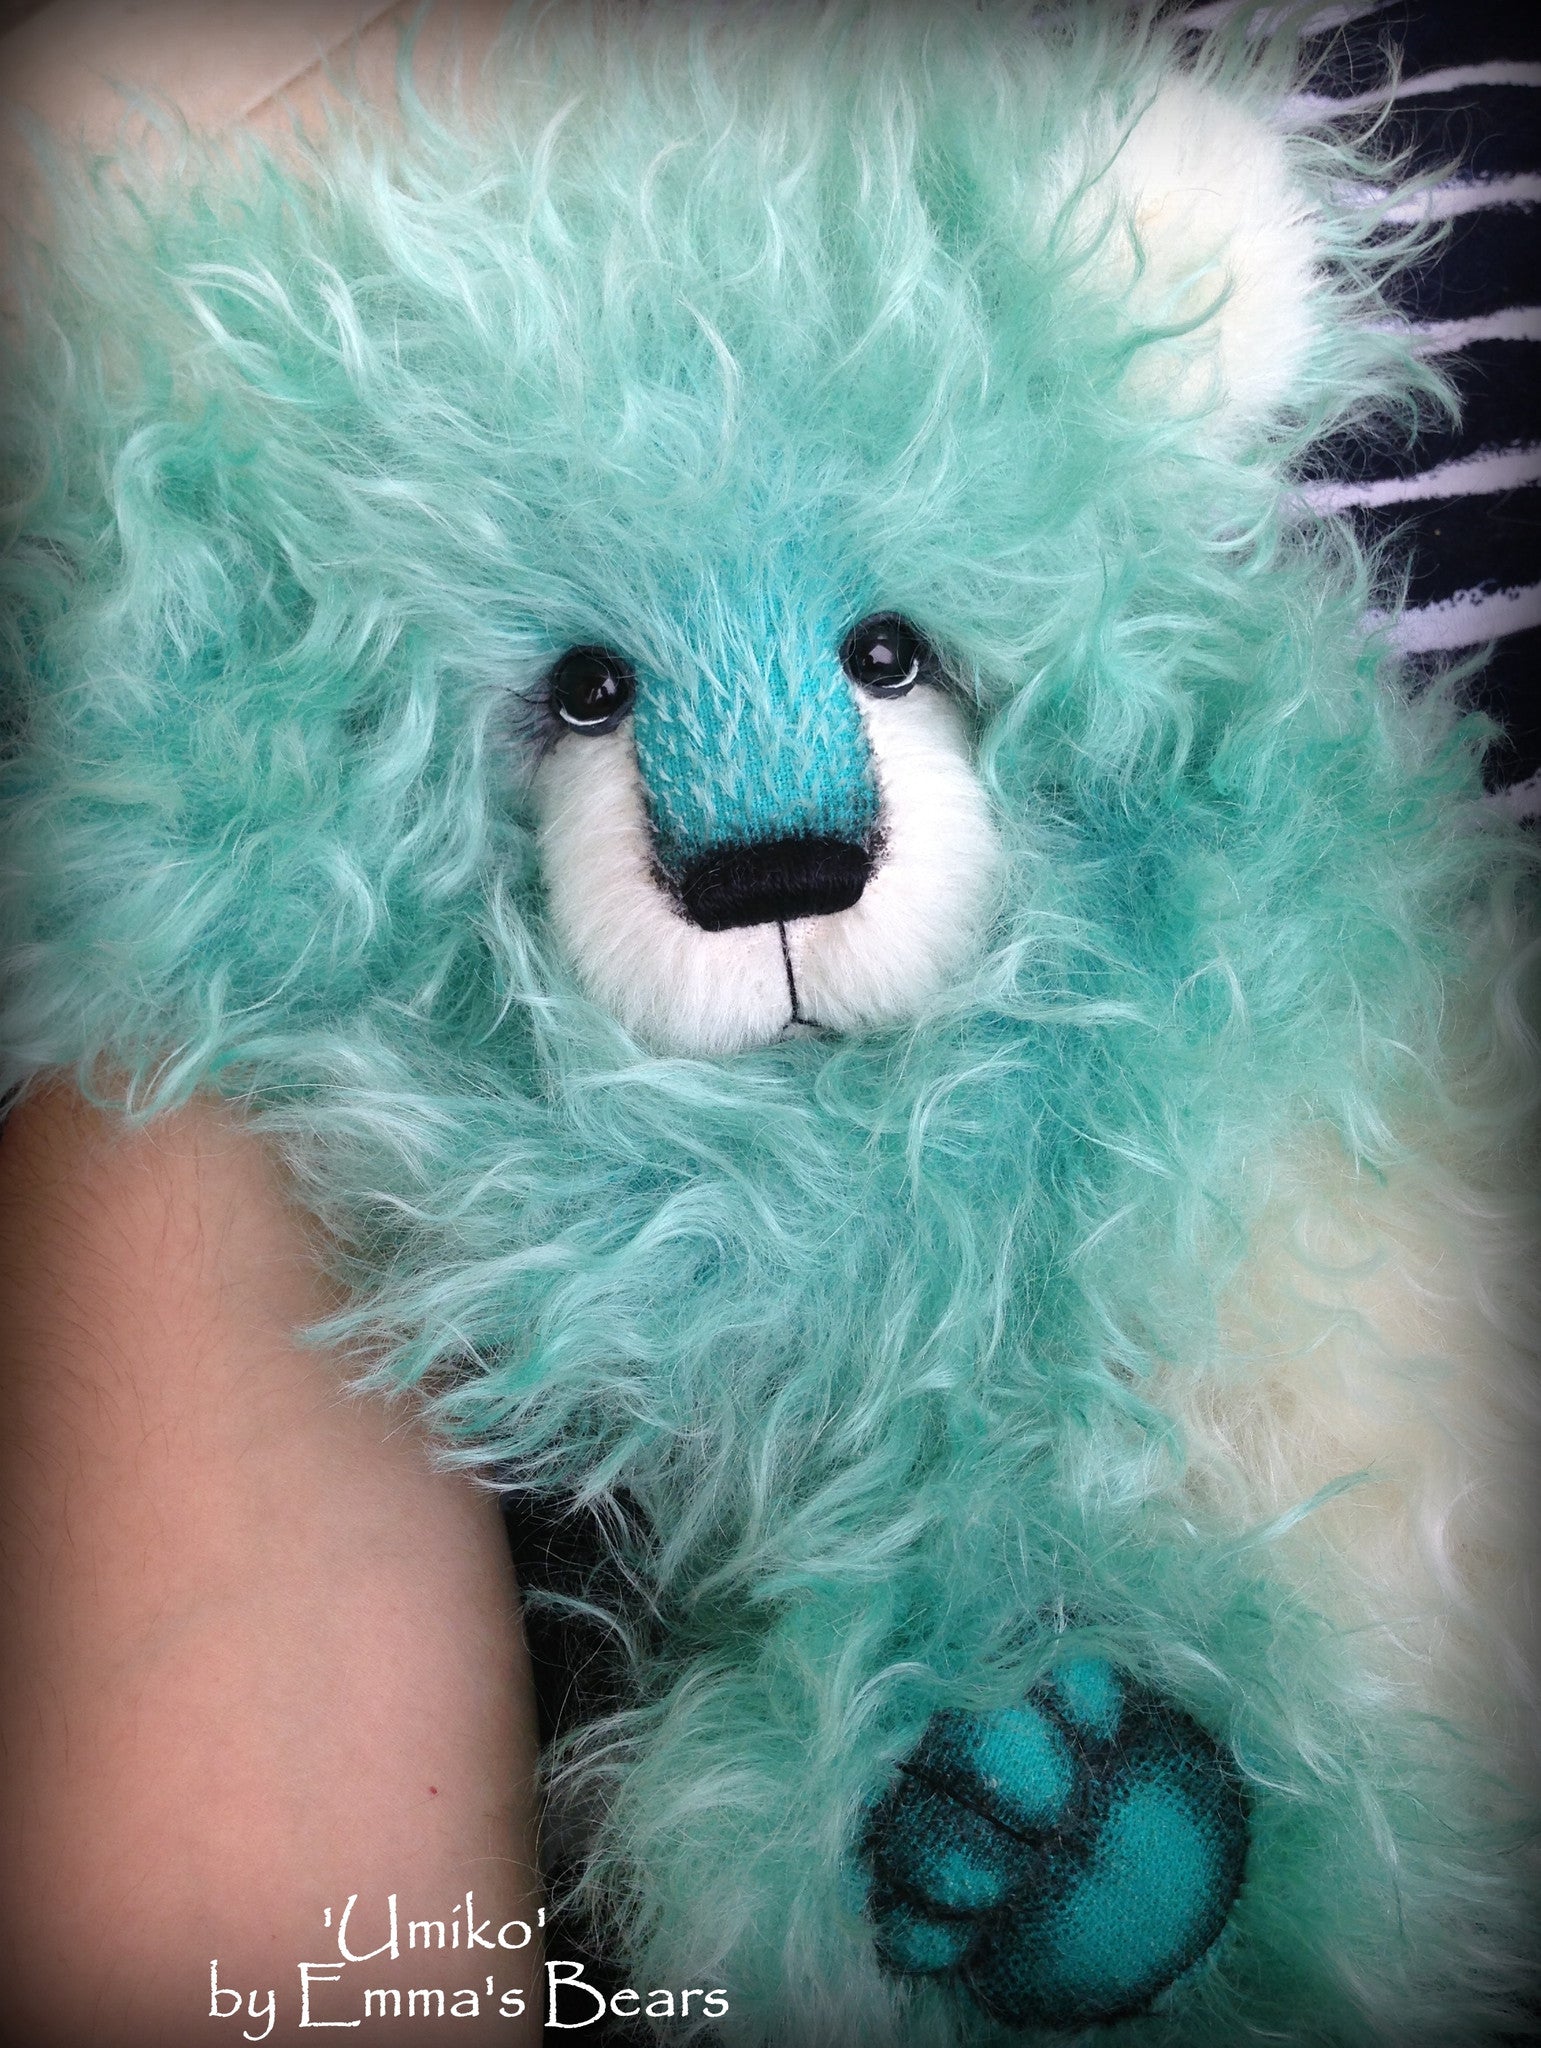 Umiko - 17IN hand dyed turquoise mohair bear by Emmas Bears - OOAK